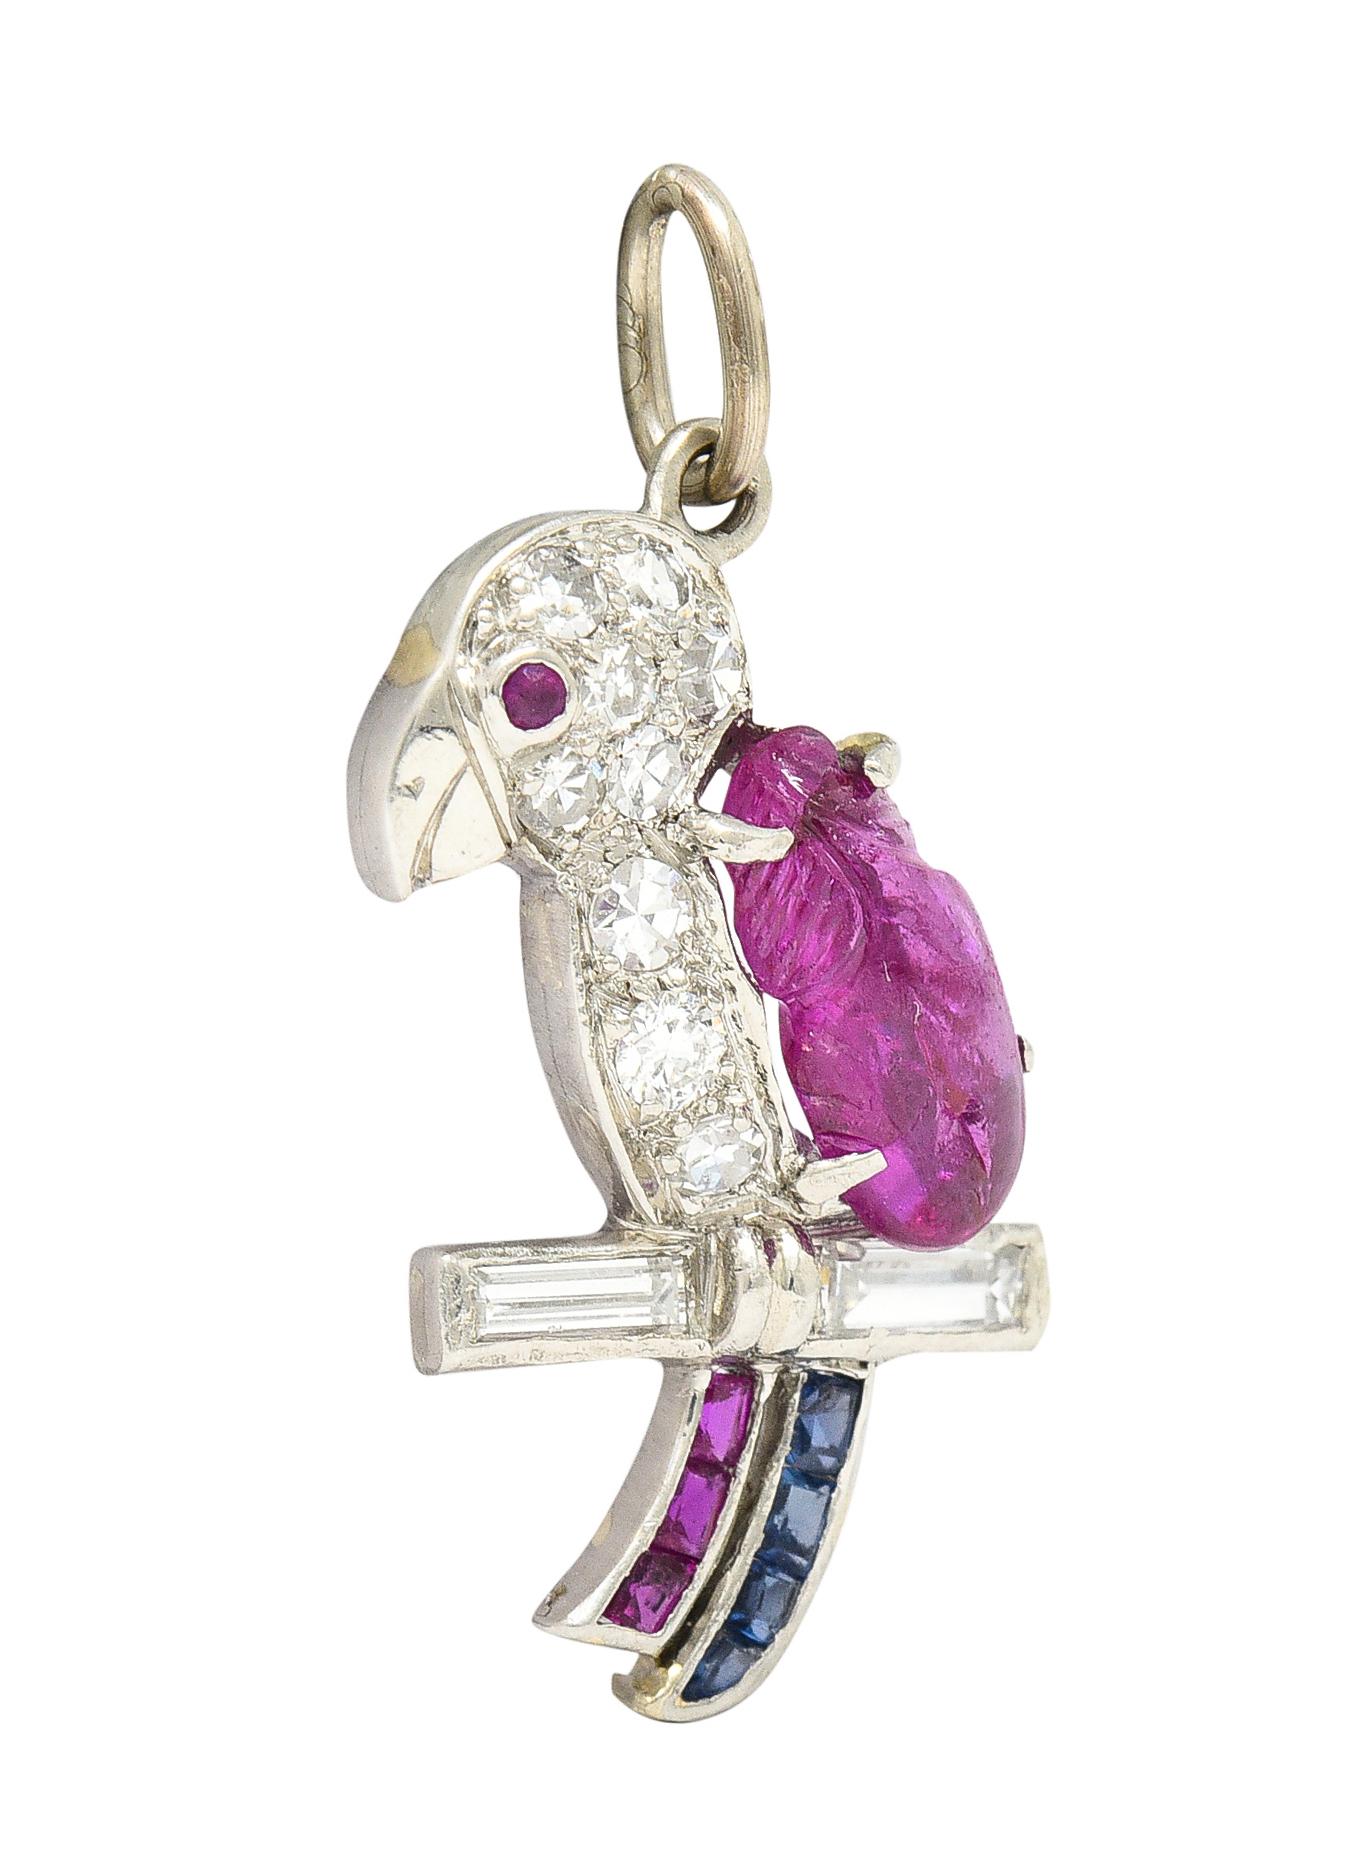 Designed as a perched parrot on a baguette cut diamond branch. Featuring a Mughal carved ruby cabochon weighing approximately 1.12 carats. With ruby eye and channel set calibré cut rubies and sapphires as tail plumage. Weighing collectively